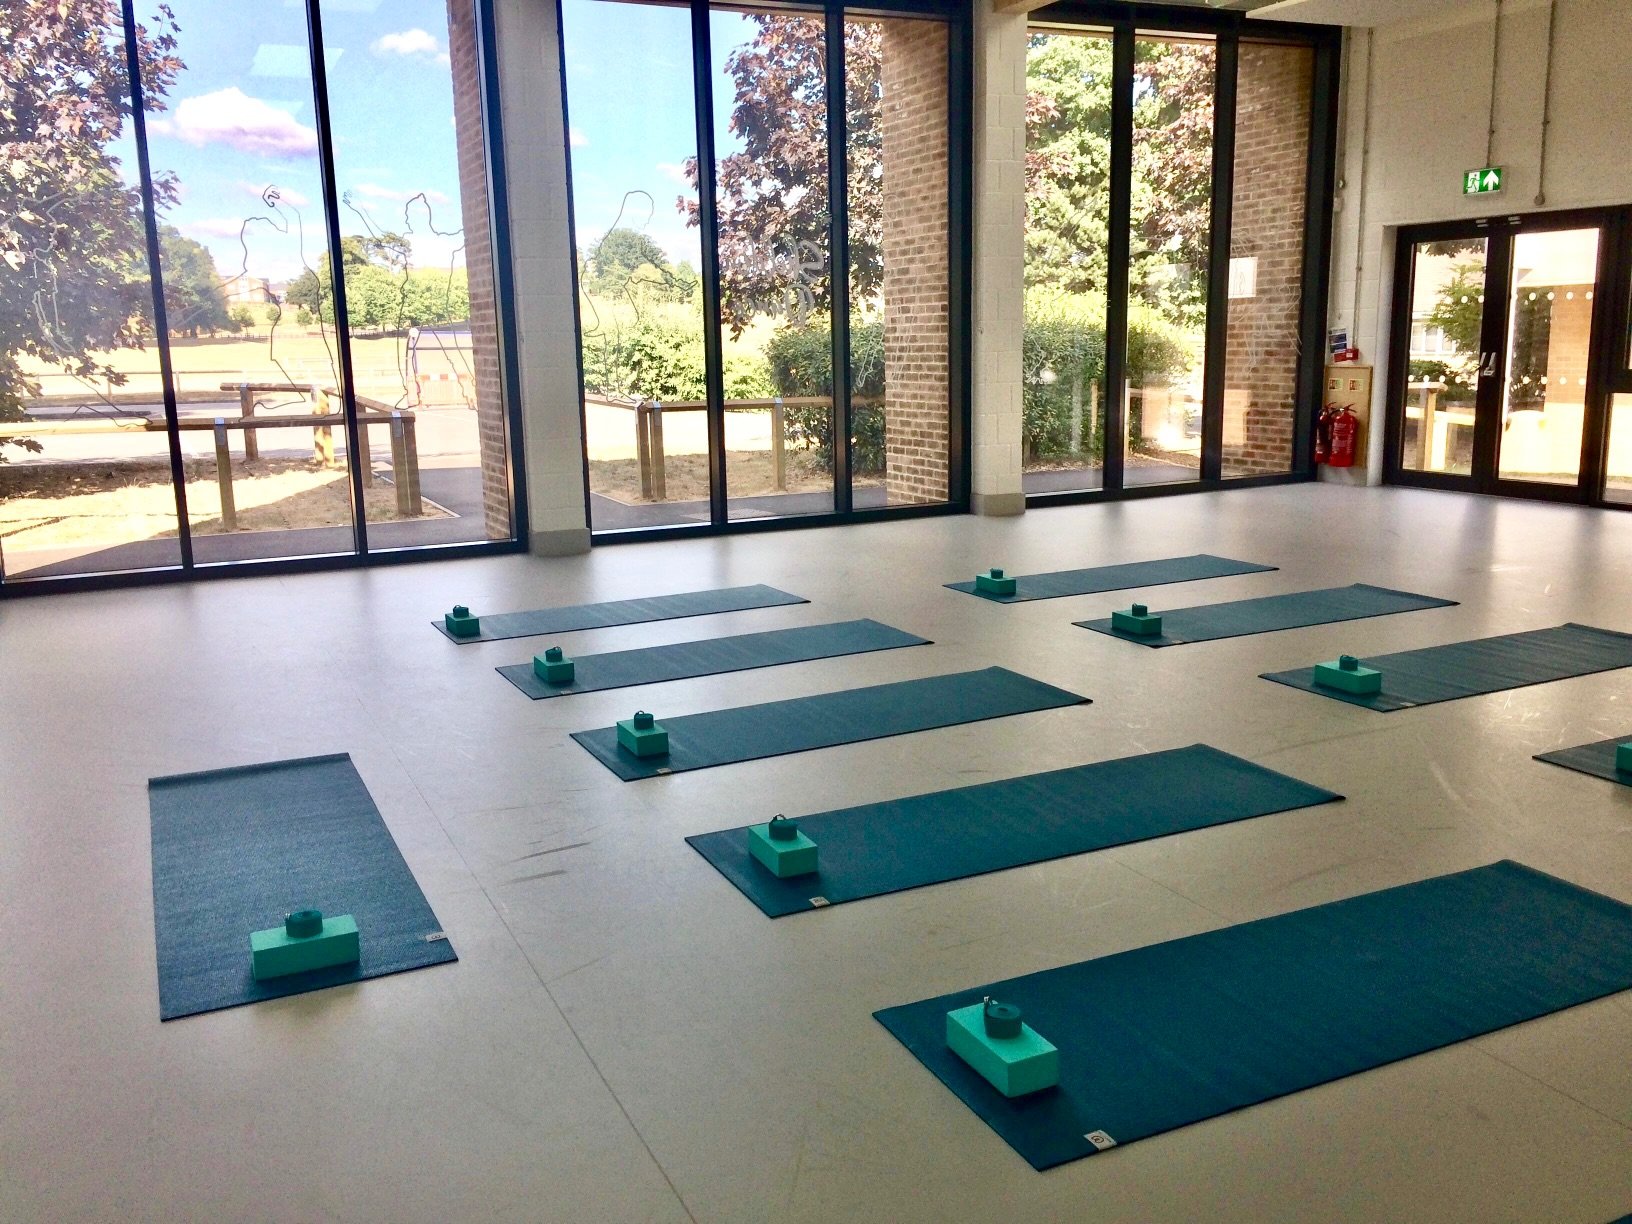 Yoga Classes — Space to Balance